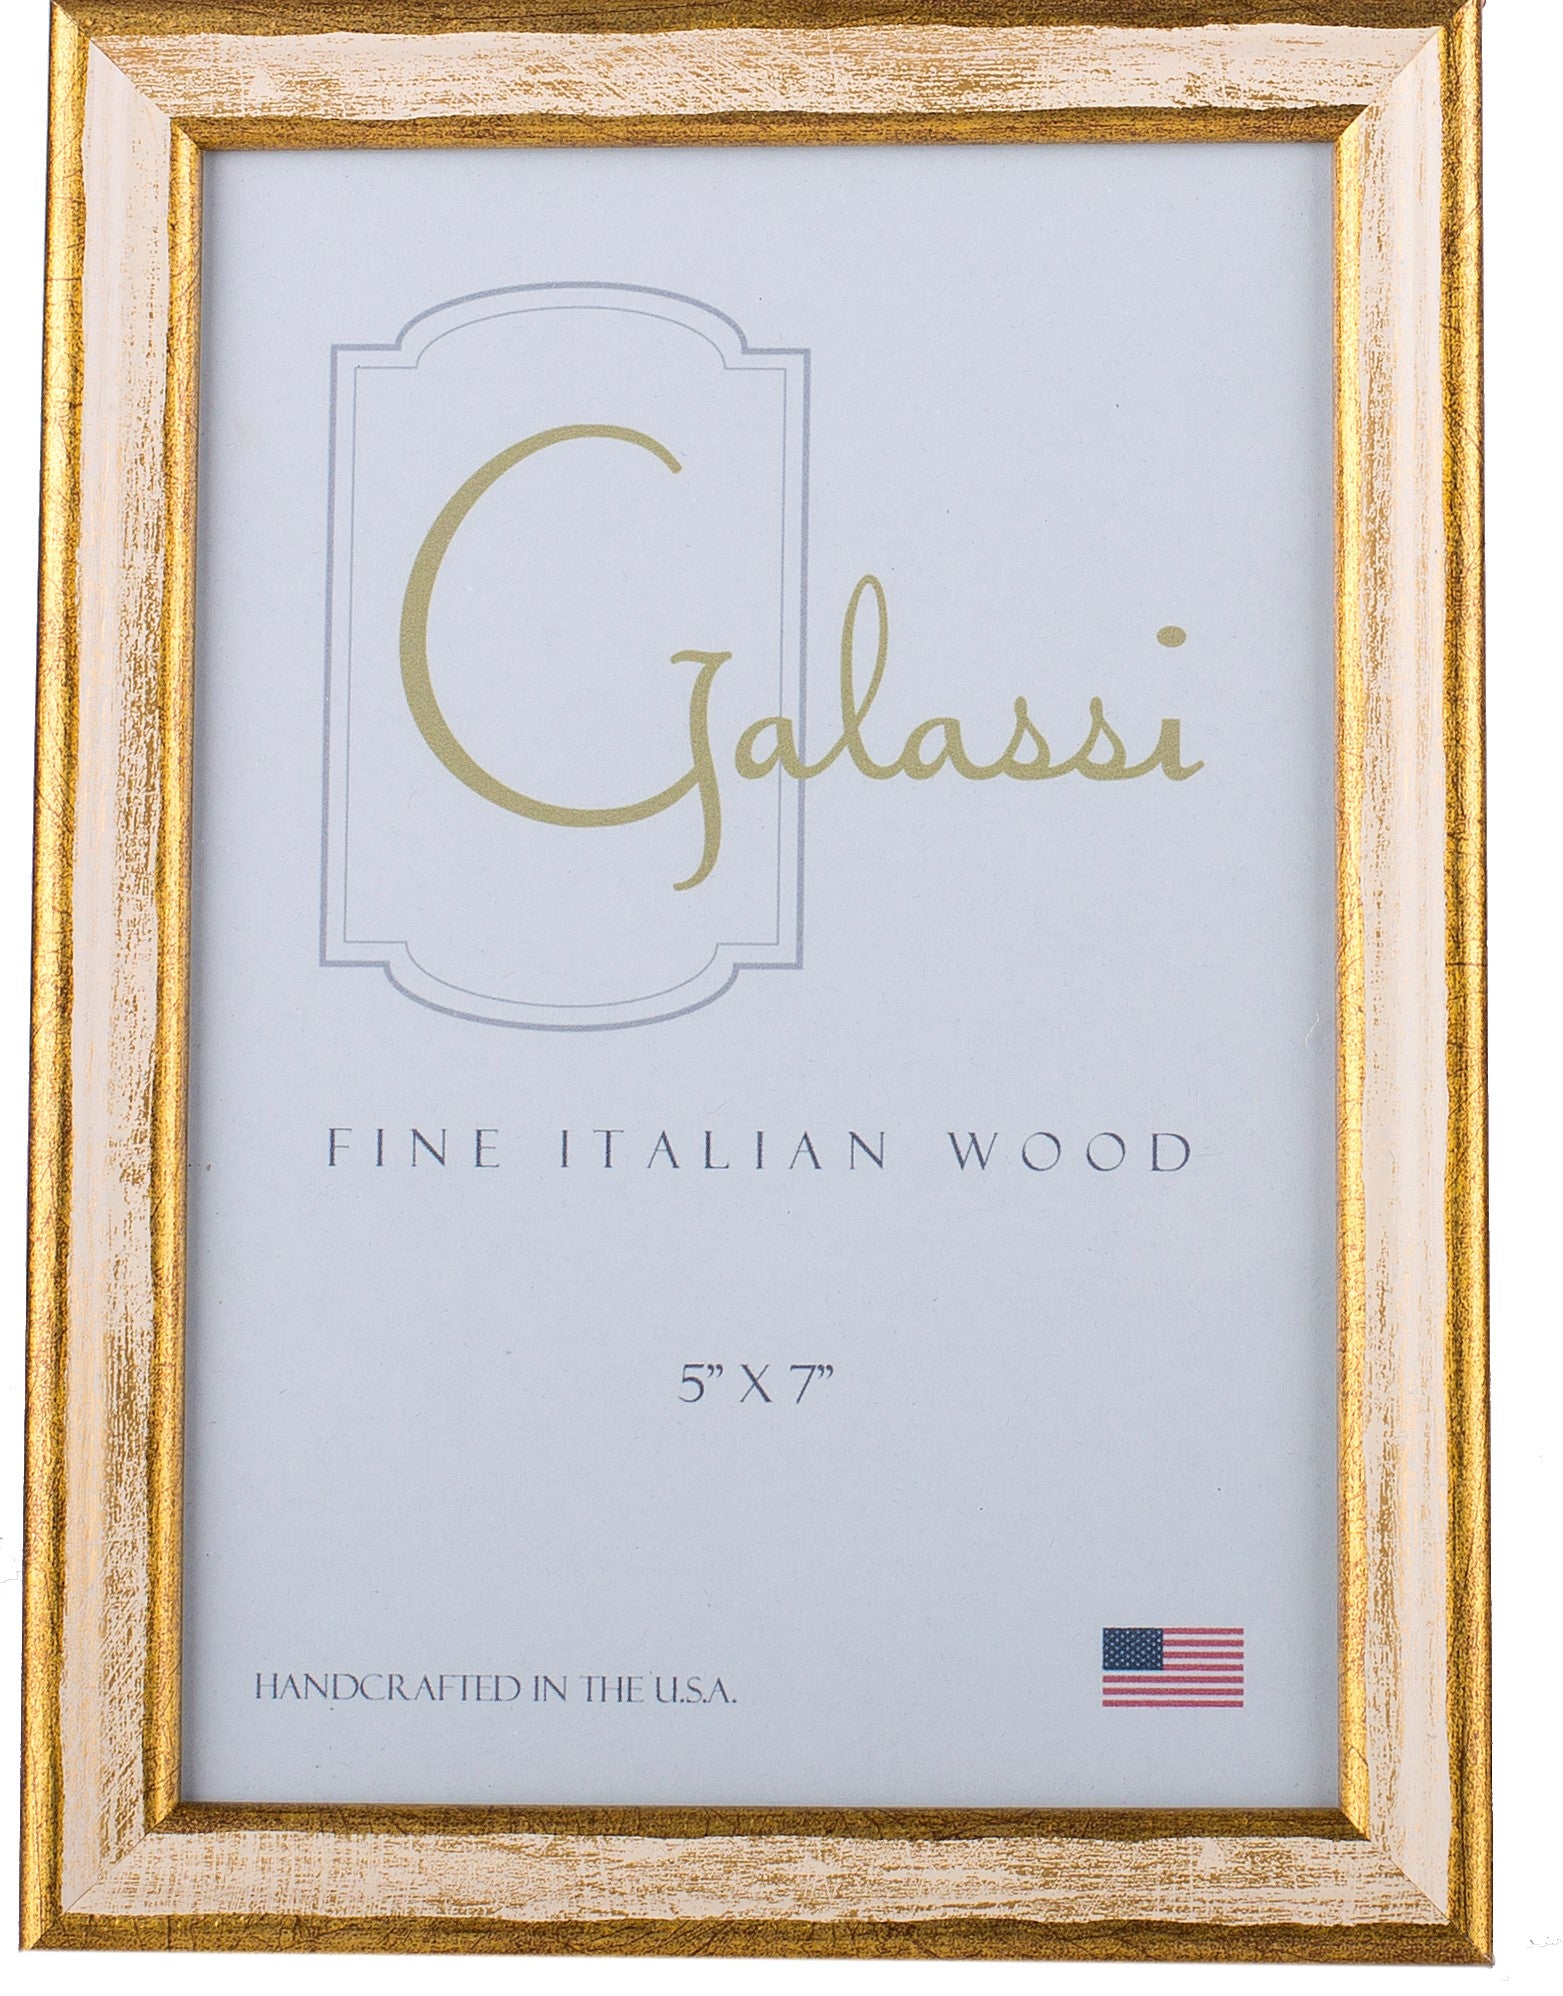 Galassi Cream and Gold Wood Frame